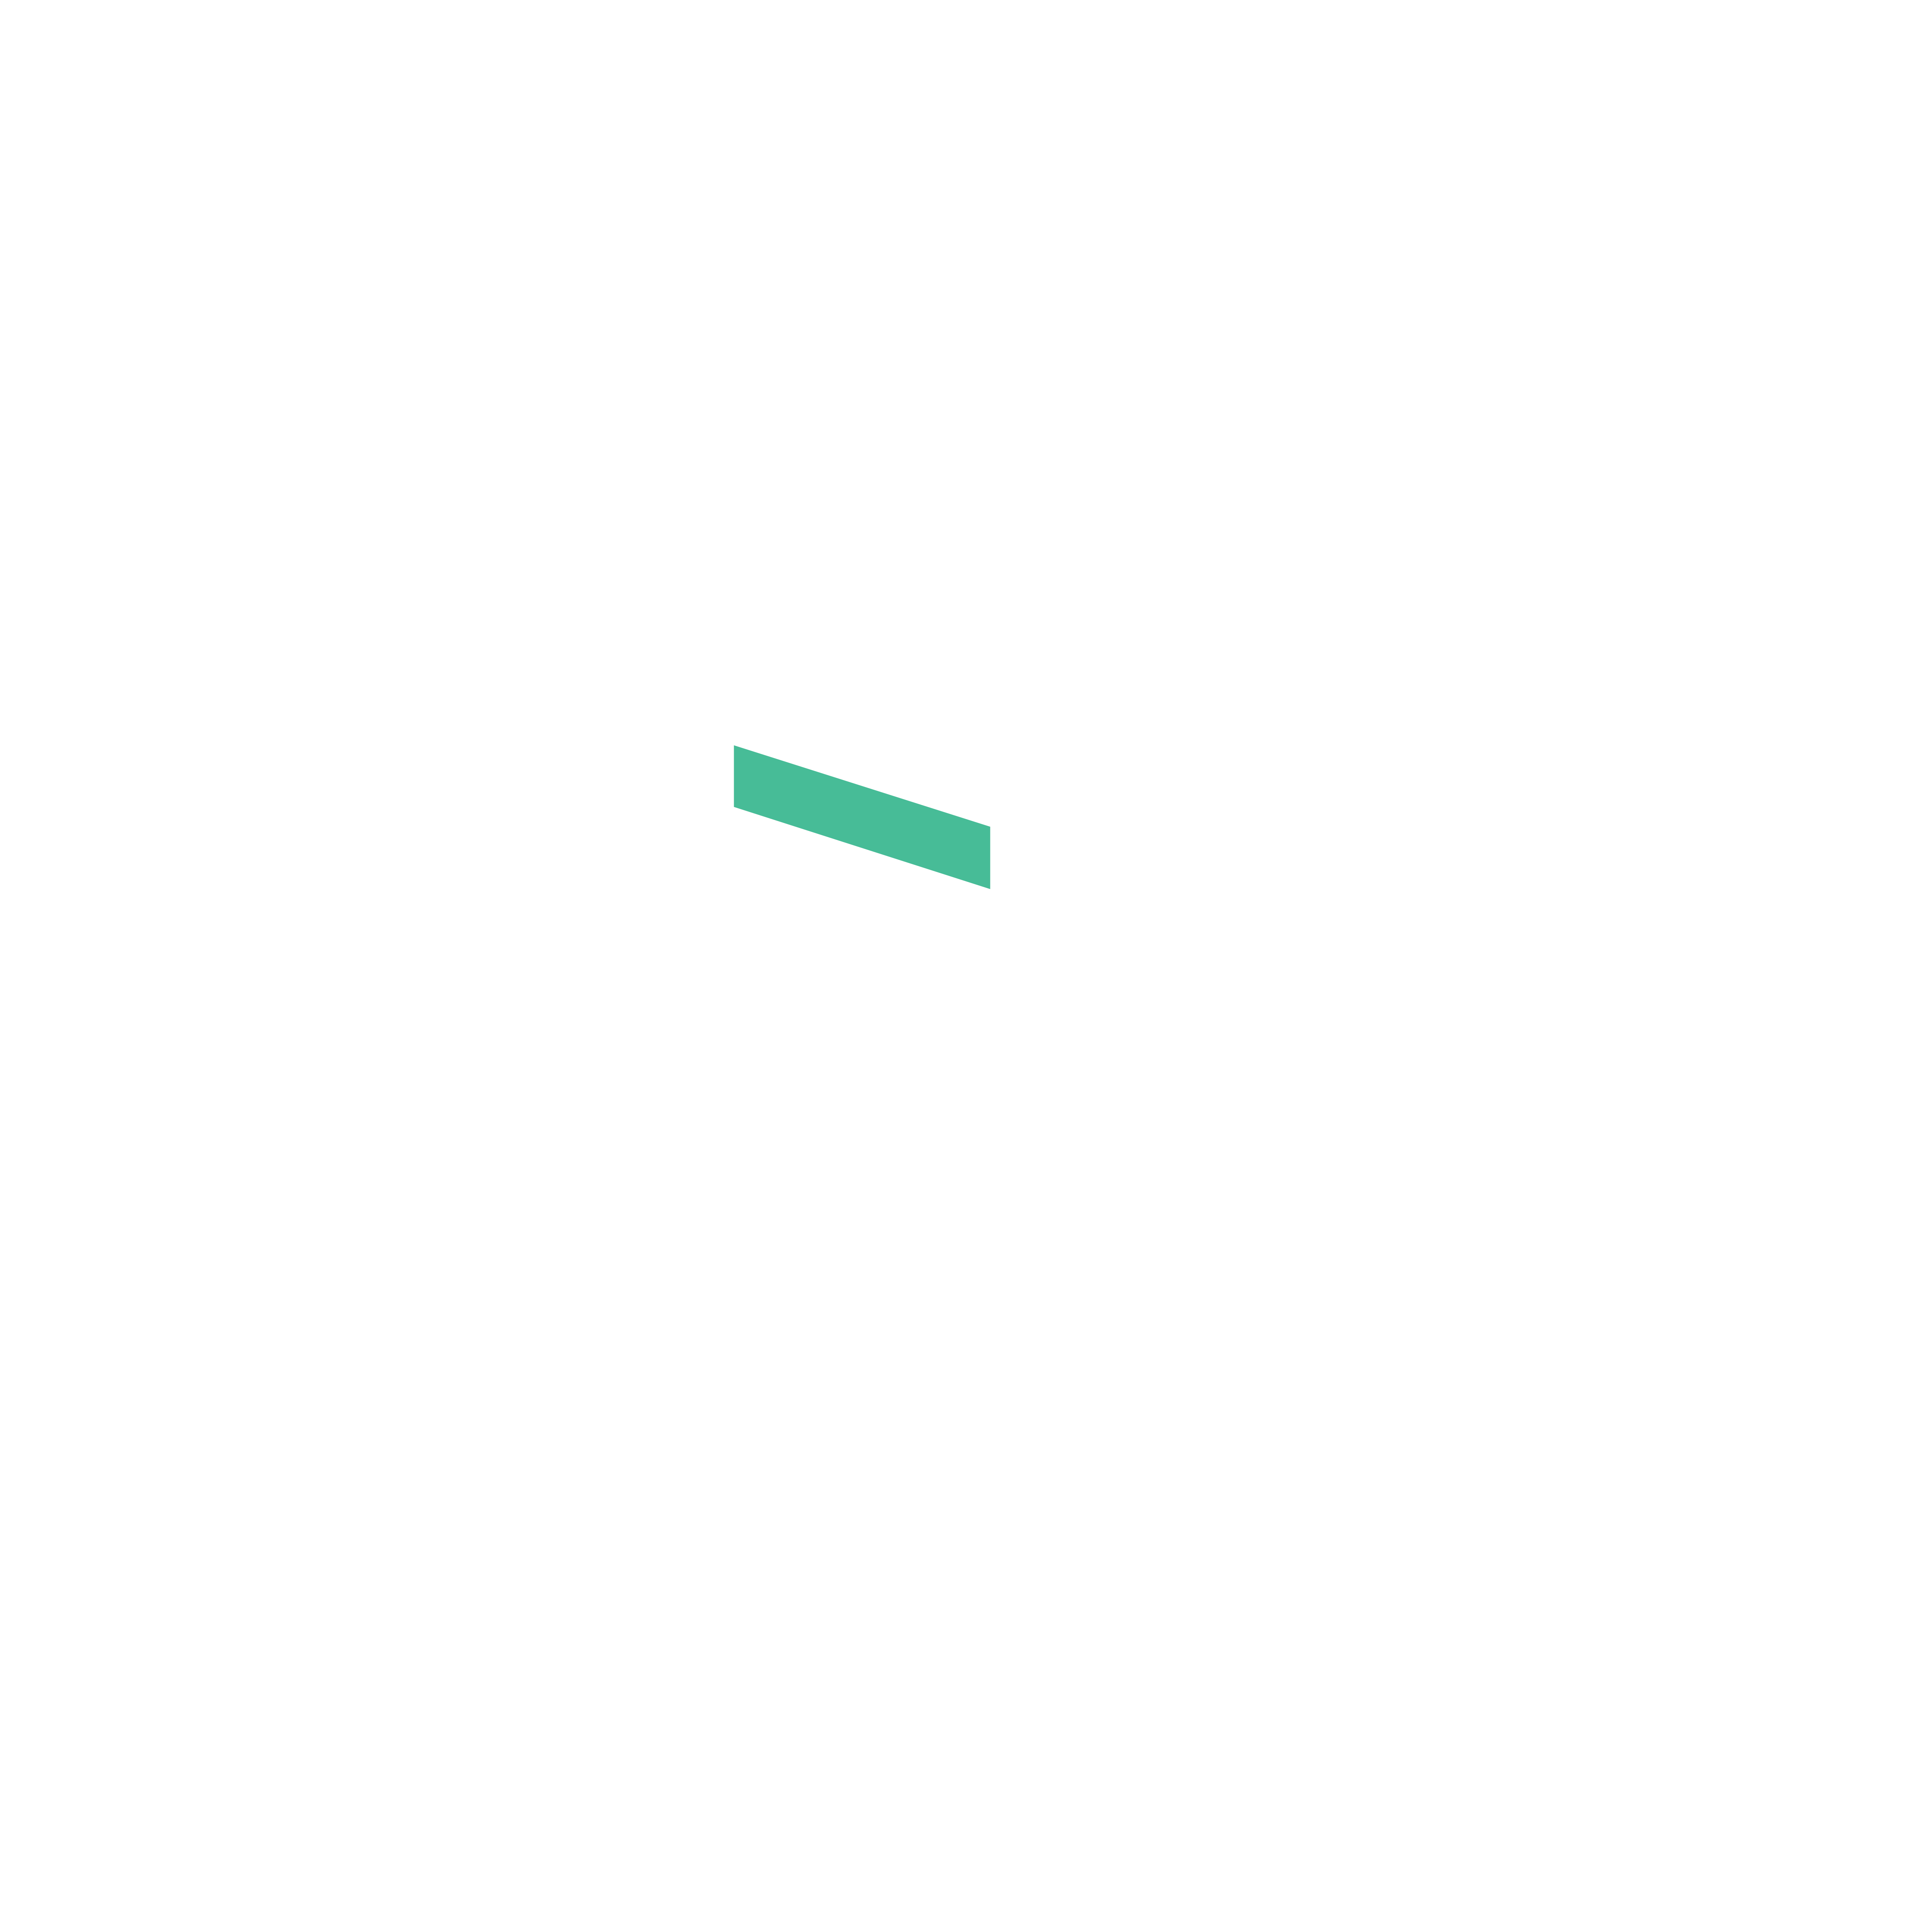 Encompass Supply Chain Solutions